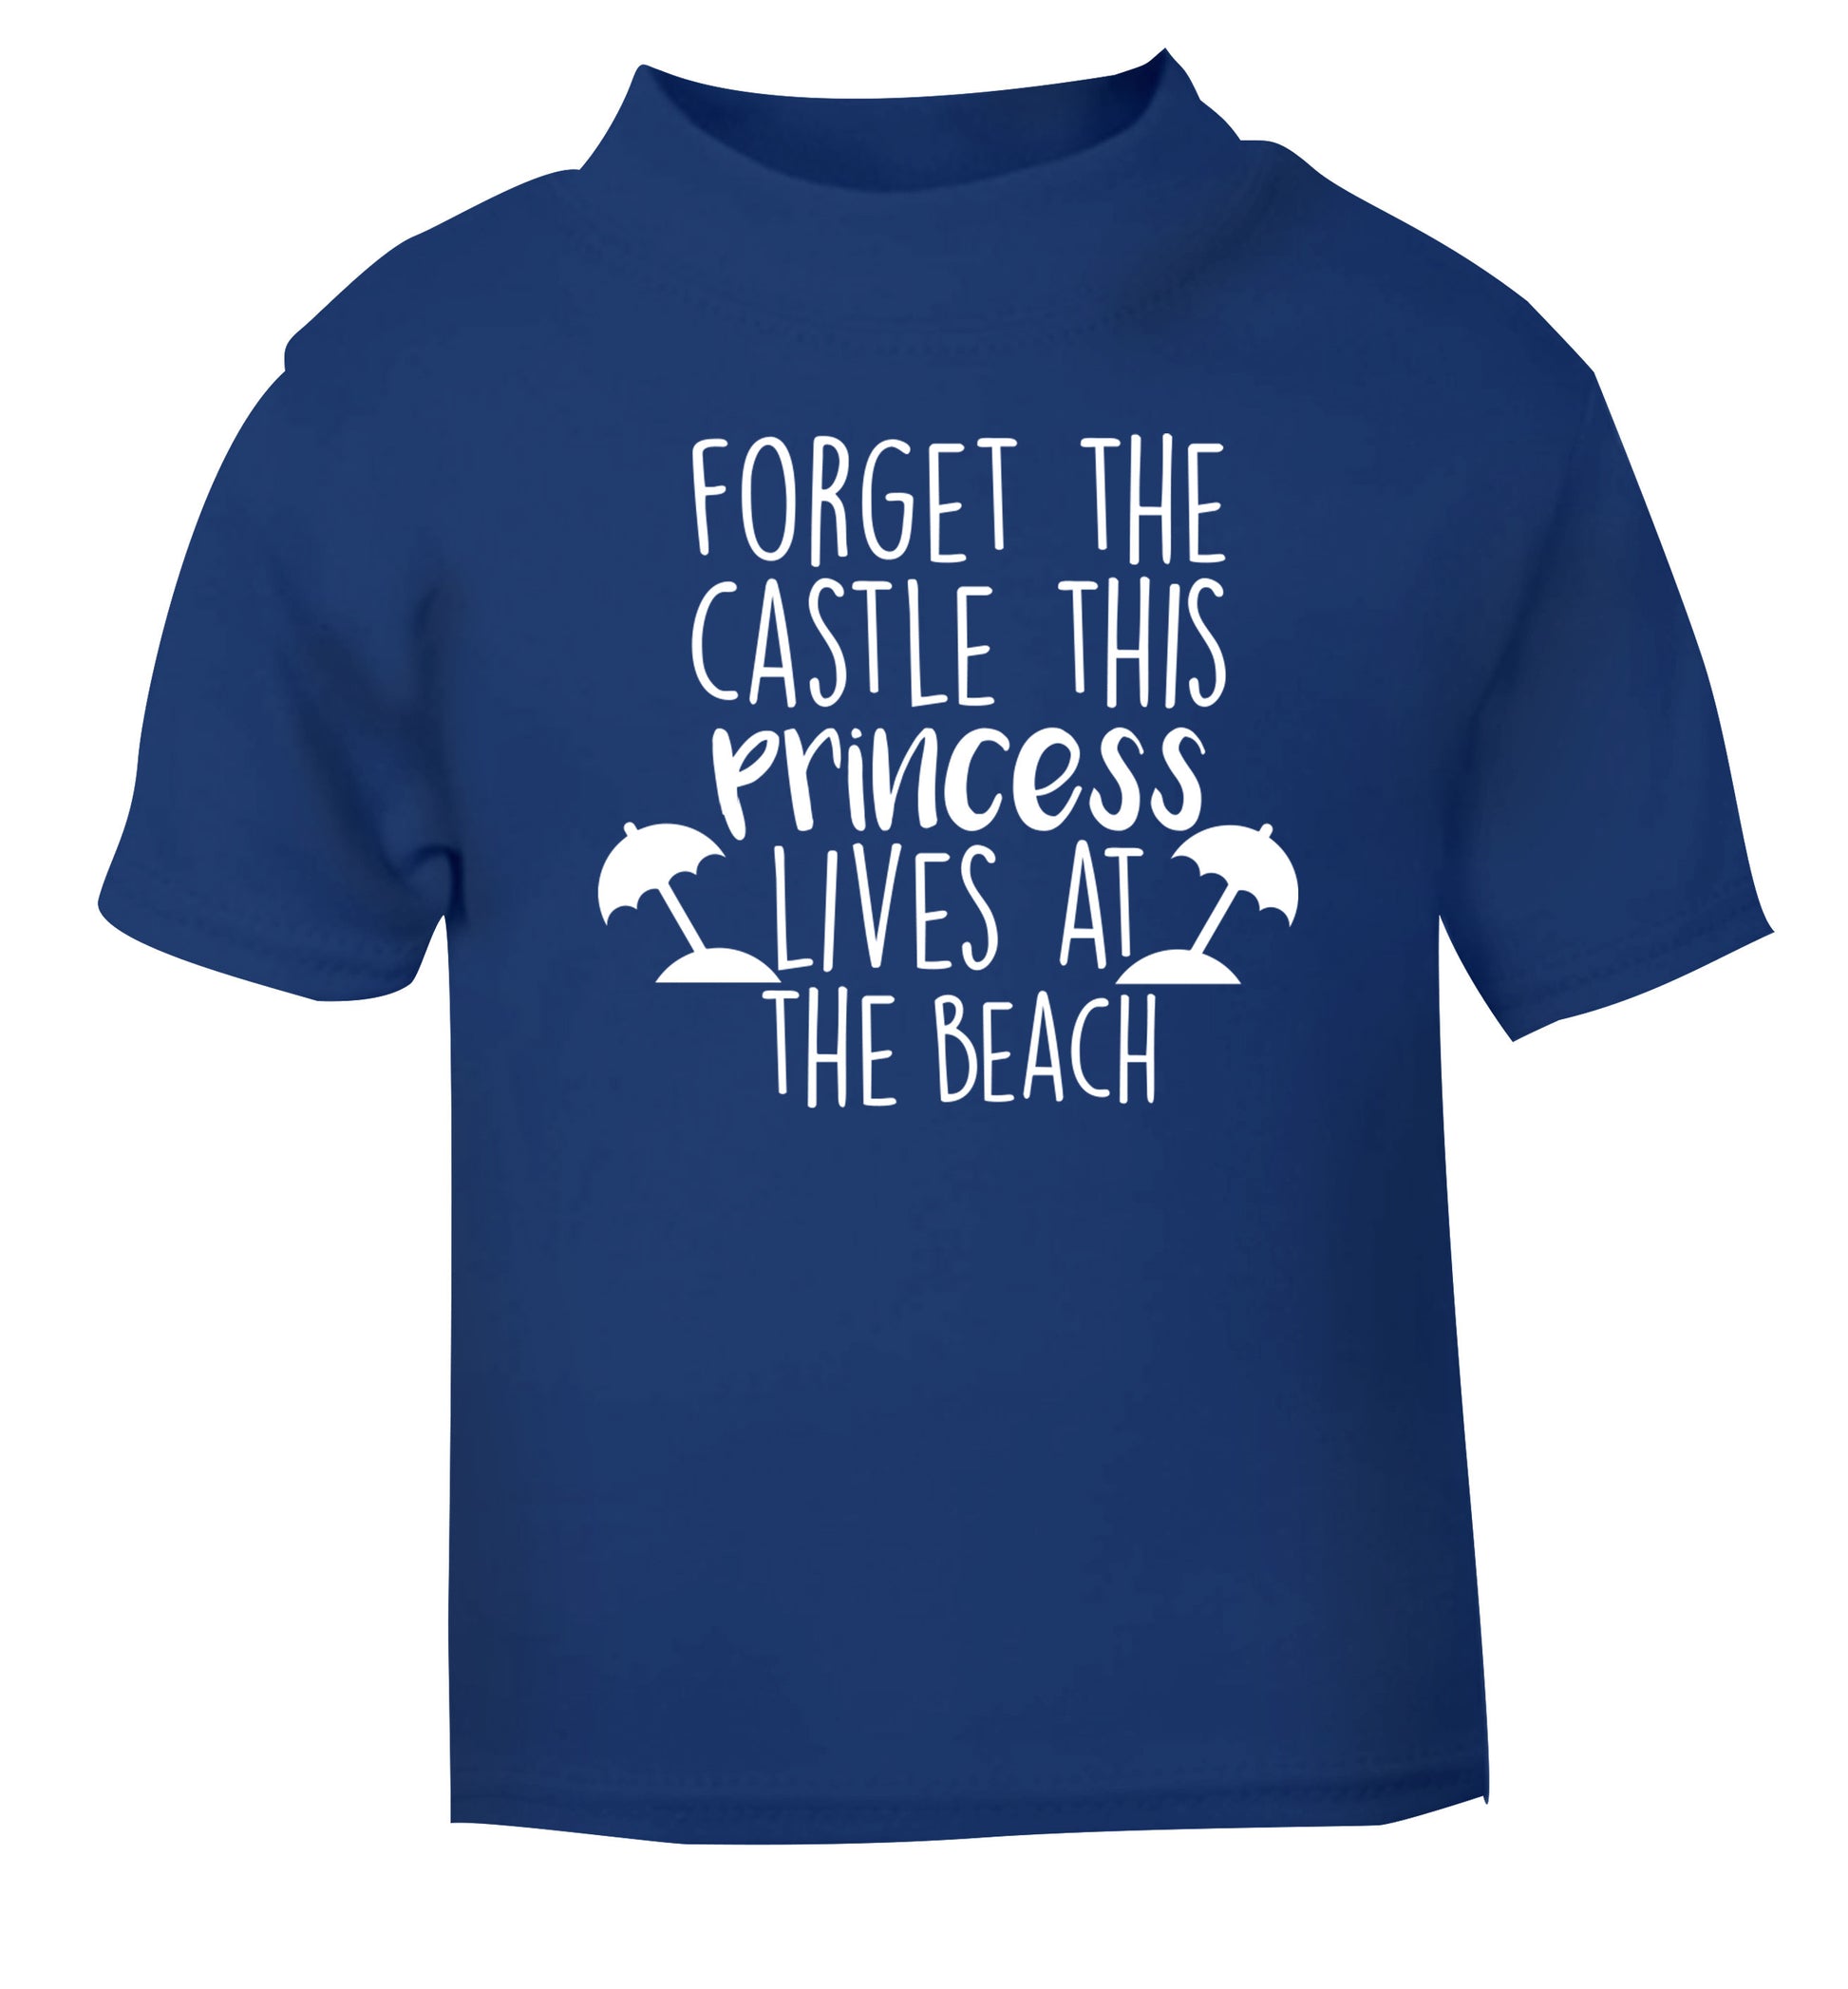 Forget the castle this princess lives at the beach blue Baby Toddler Tshirt 2 Years